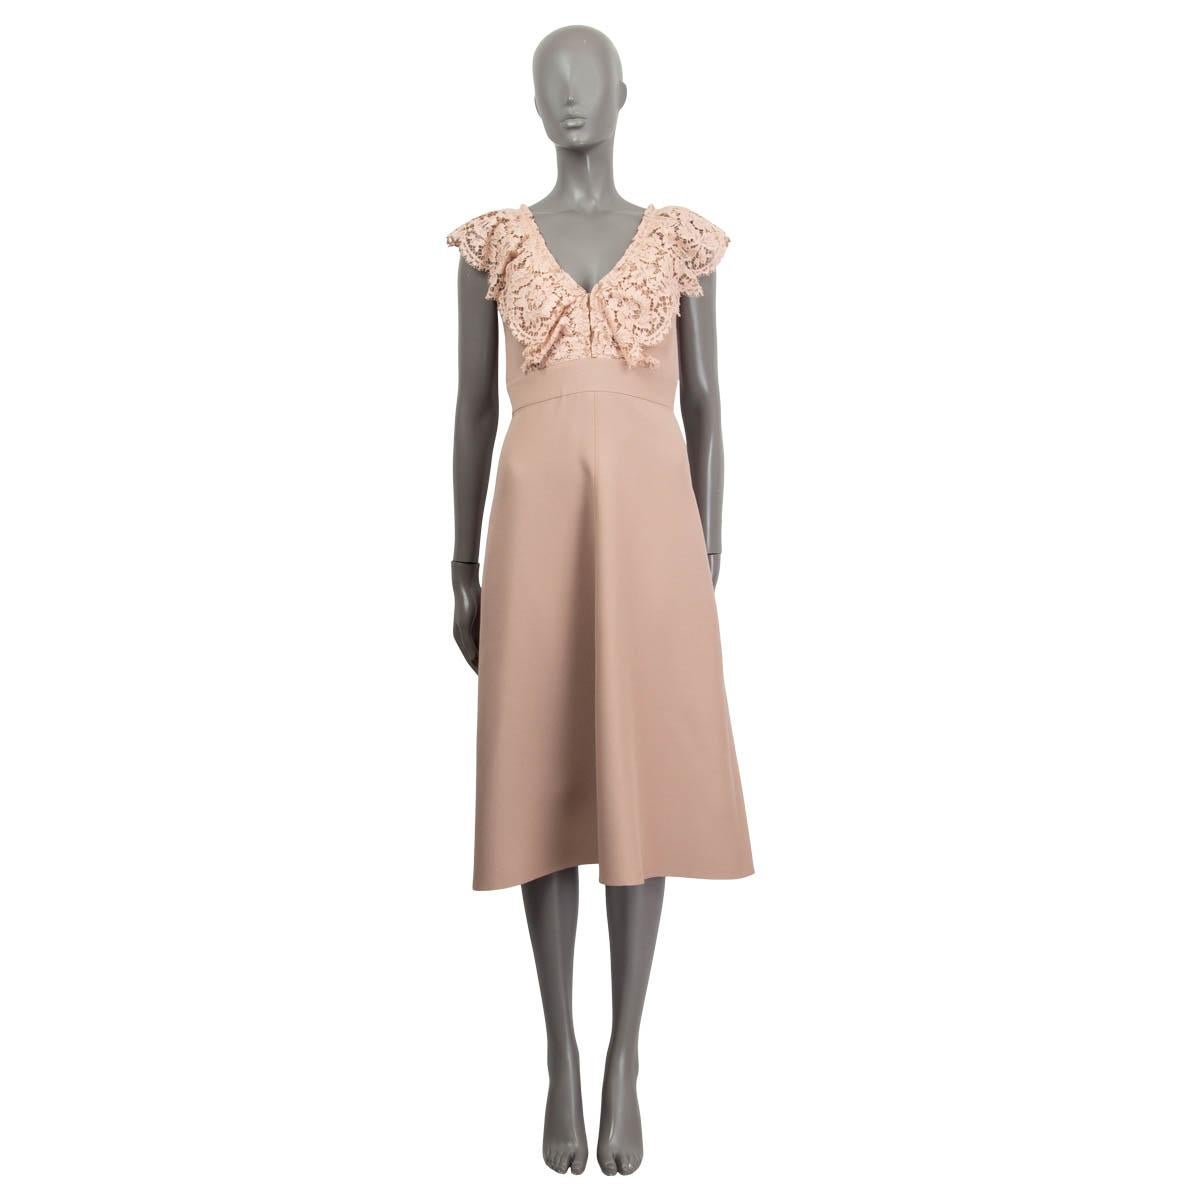 100% authentic Valentino sleeveless flared dress in dusty rose virgin wool (65%) and silk (35%). Embellished with lace straps. Opens with a concealed zipper and hook on the back. Lined in dusty rose silk (100%). Has been worn and is in excellent